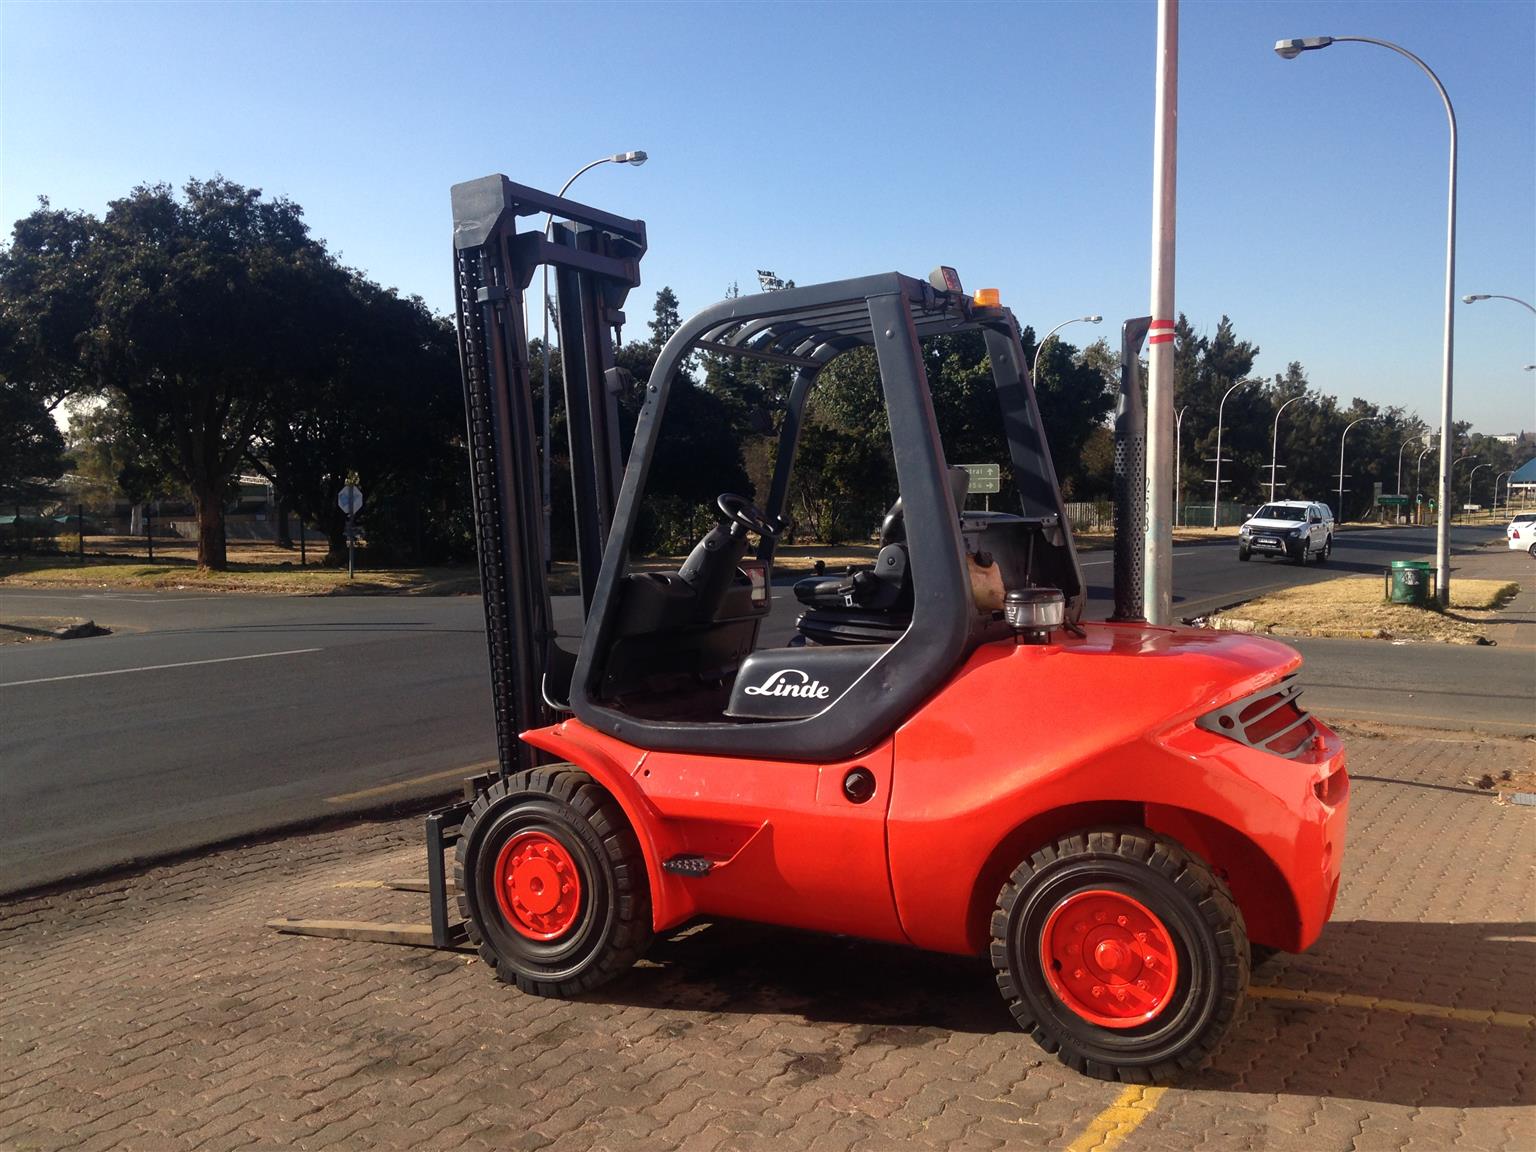 5 Ton Linde Forklift For Sale From 1 6 Ton 5 Ton Linde Diesel Or Gas Junk Mail